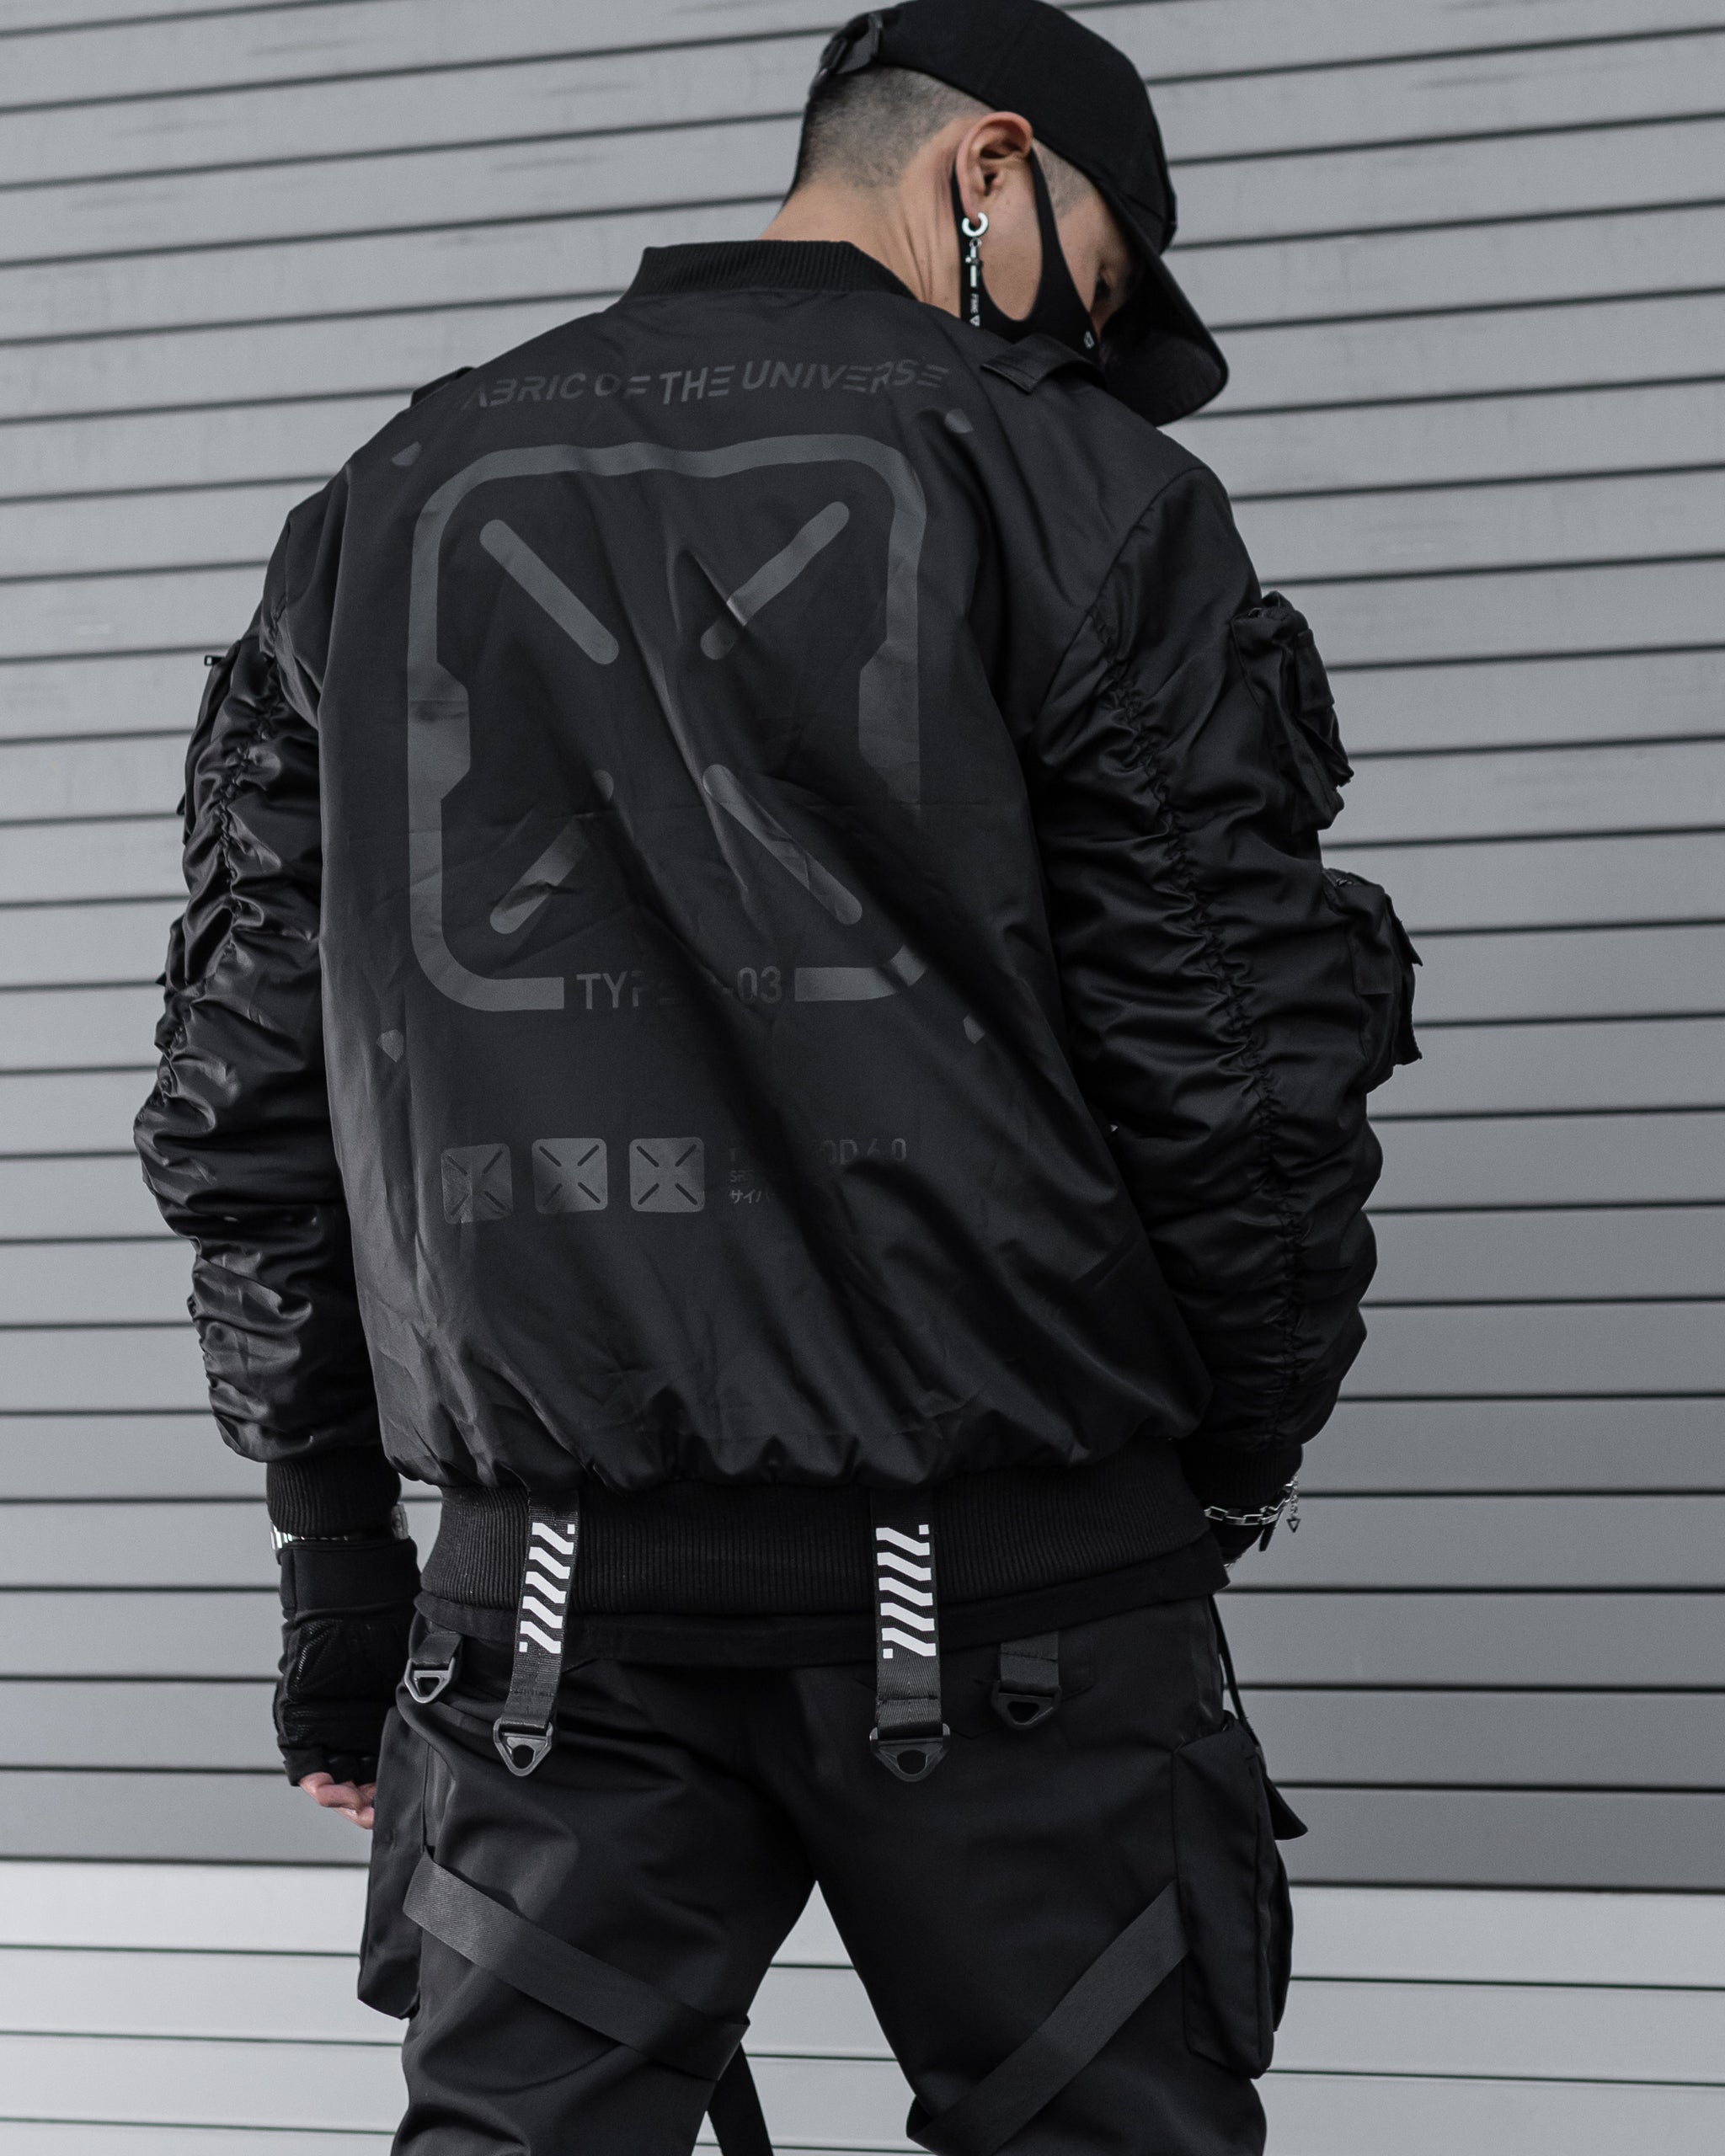 XB-03 Stealth Black Bomber Jacket of - Universe the Fabric